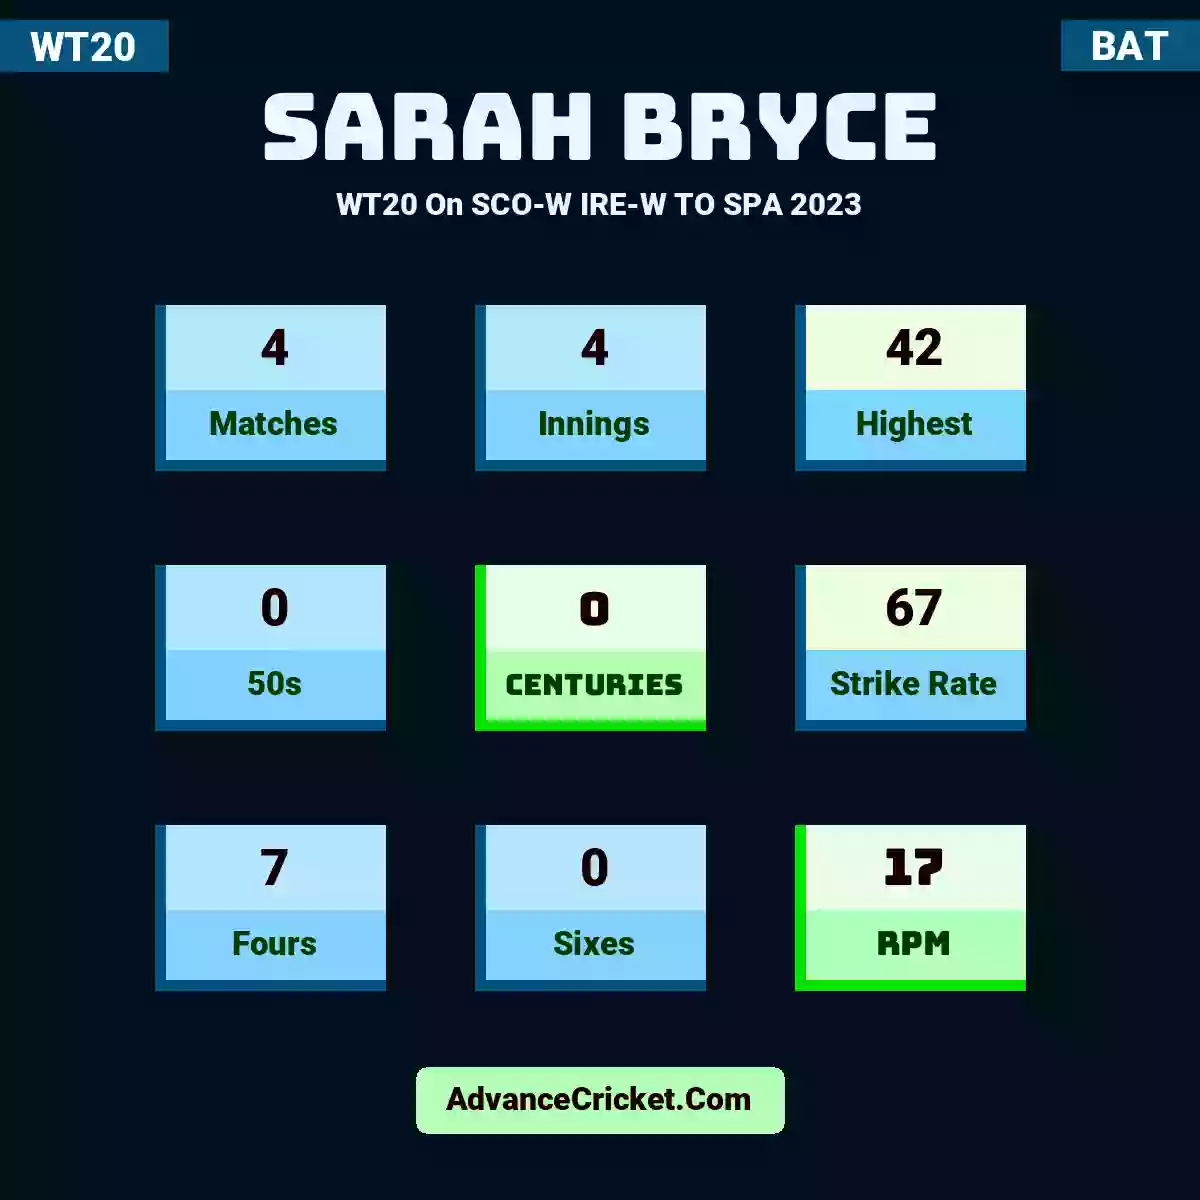 Sarah Bryce WT20  On SCO-W IRE-W TO SPA 2023, Sarah Bryce played 4 matches, scored 42 runs as highest, 0 half-centuries, and 0 centuries, with a strike rate of 67. S.Bryce hit 7 fours and 0 sixes, with an RPM of 17.